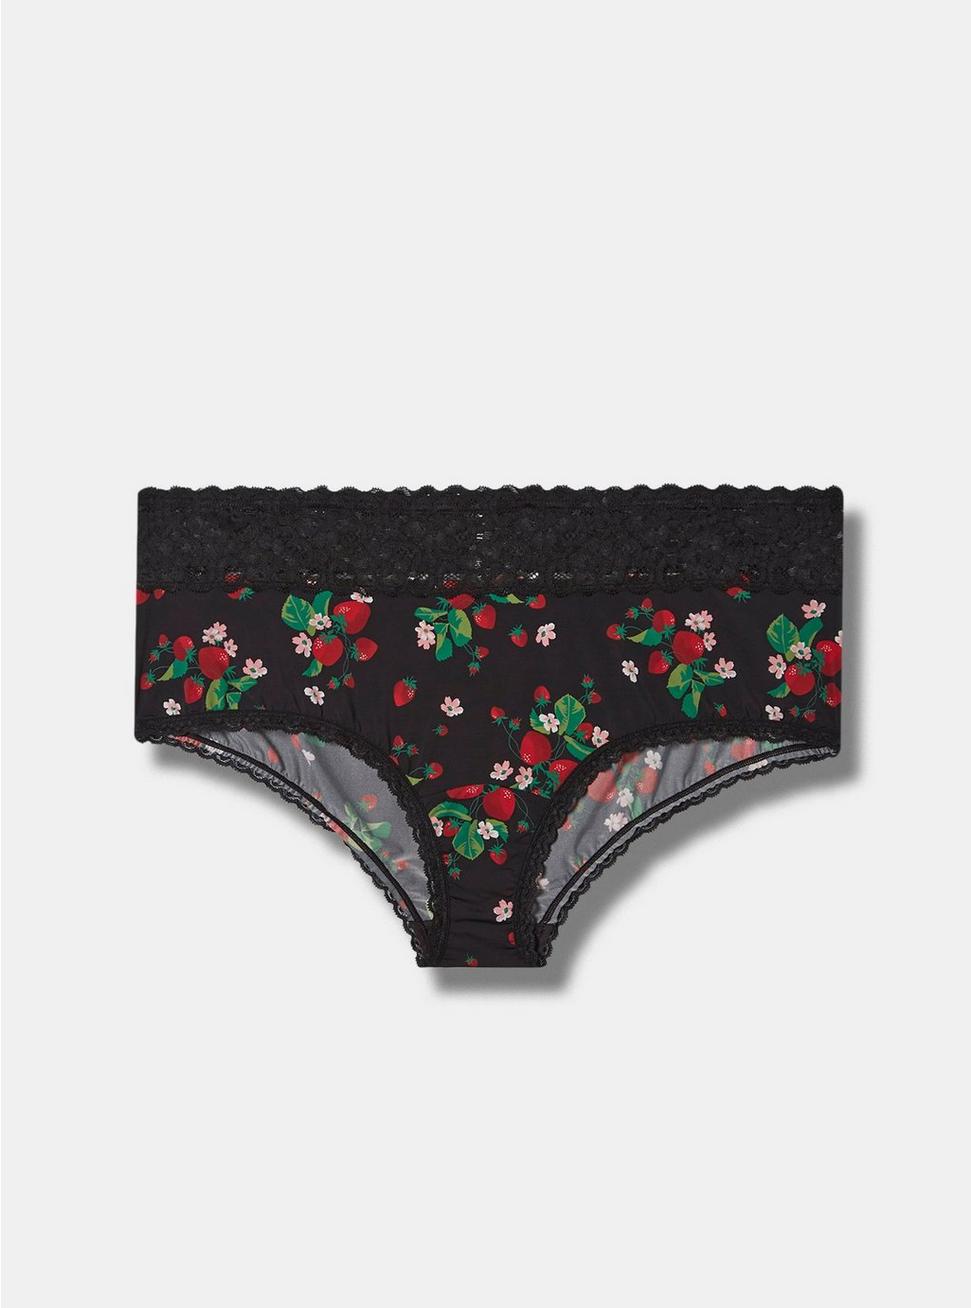 Plus Size Second Skin Mid-Rise Cheeky Lace Trim Panty, SWEET STRAWBERRIES BLACK: BLACK, hi-res